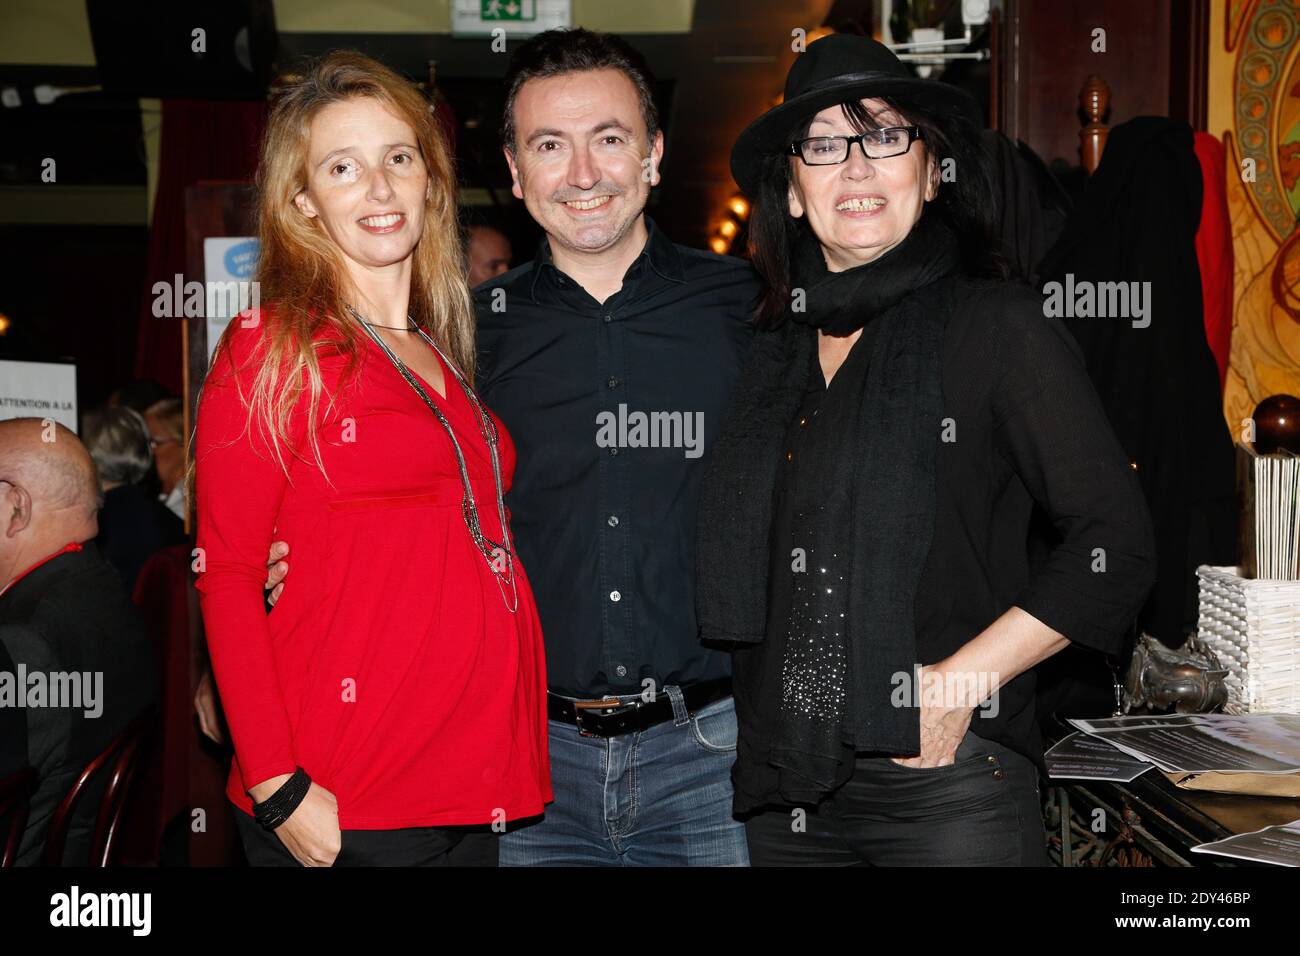 Gerald Dahan and his pregnant wife attending a party to celebrate ...